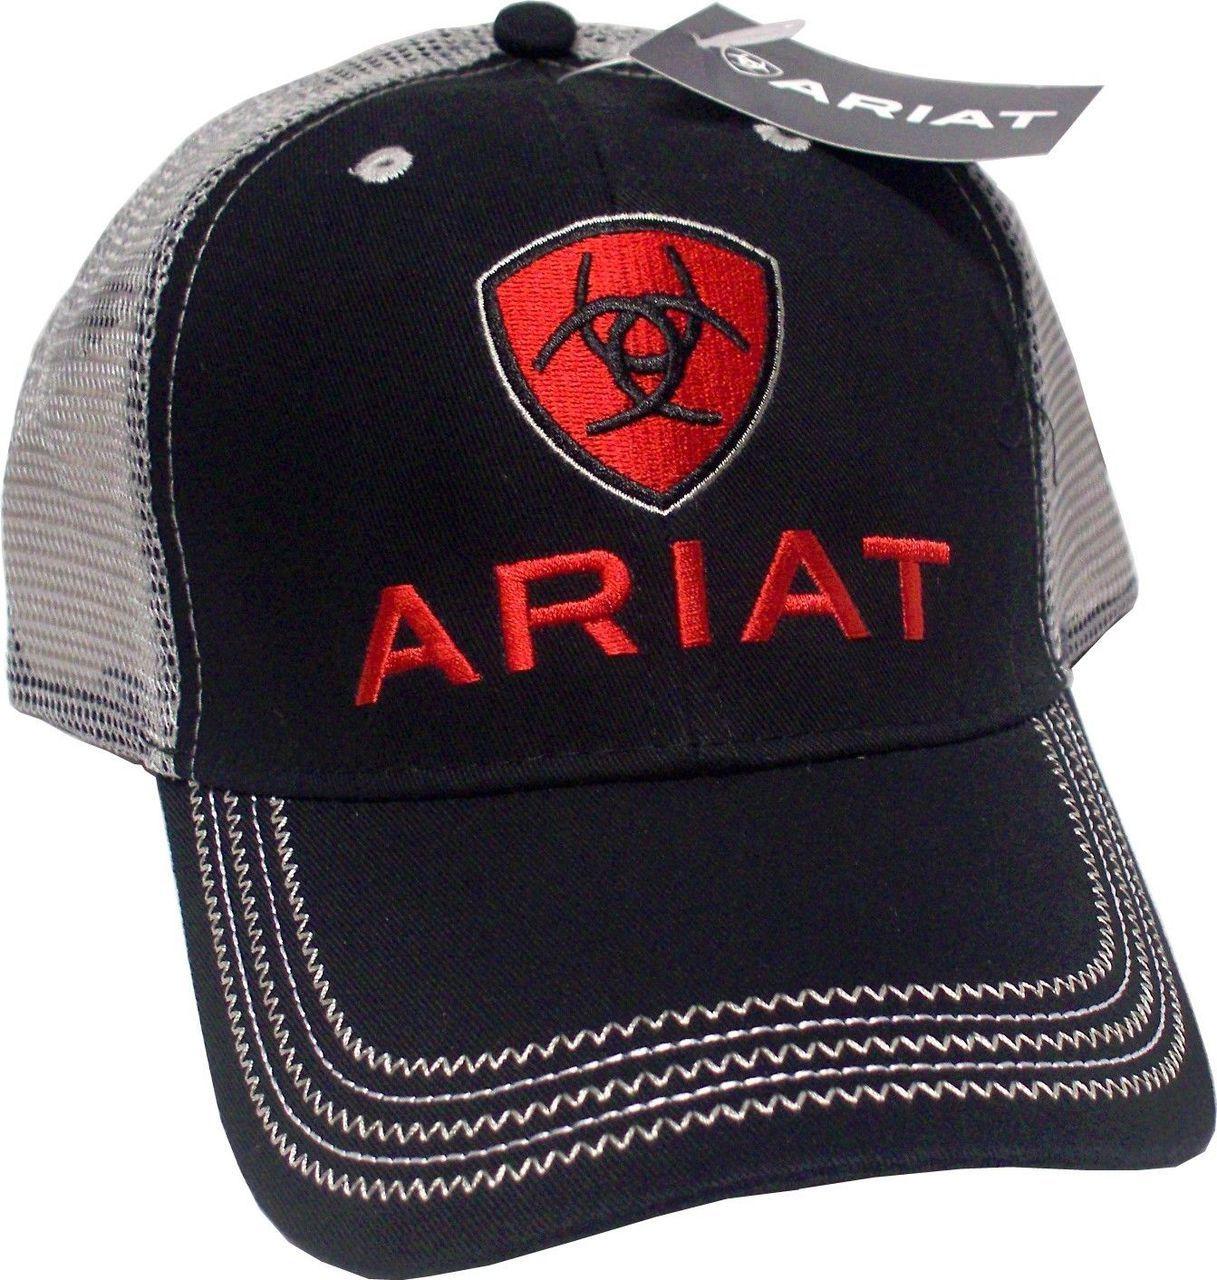 Red and Black Western Logo - Ariat Boots Logo Black Gray Red Mesh Backing Adjustable Snapback ...